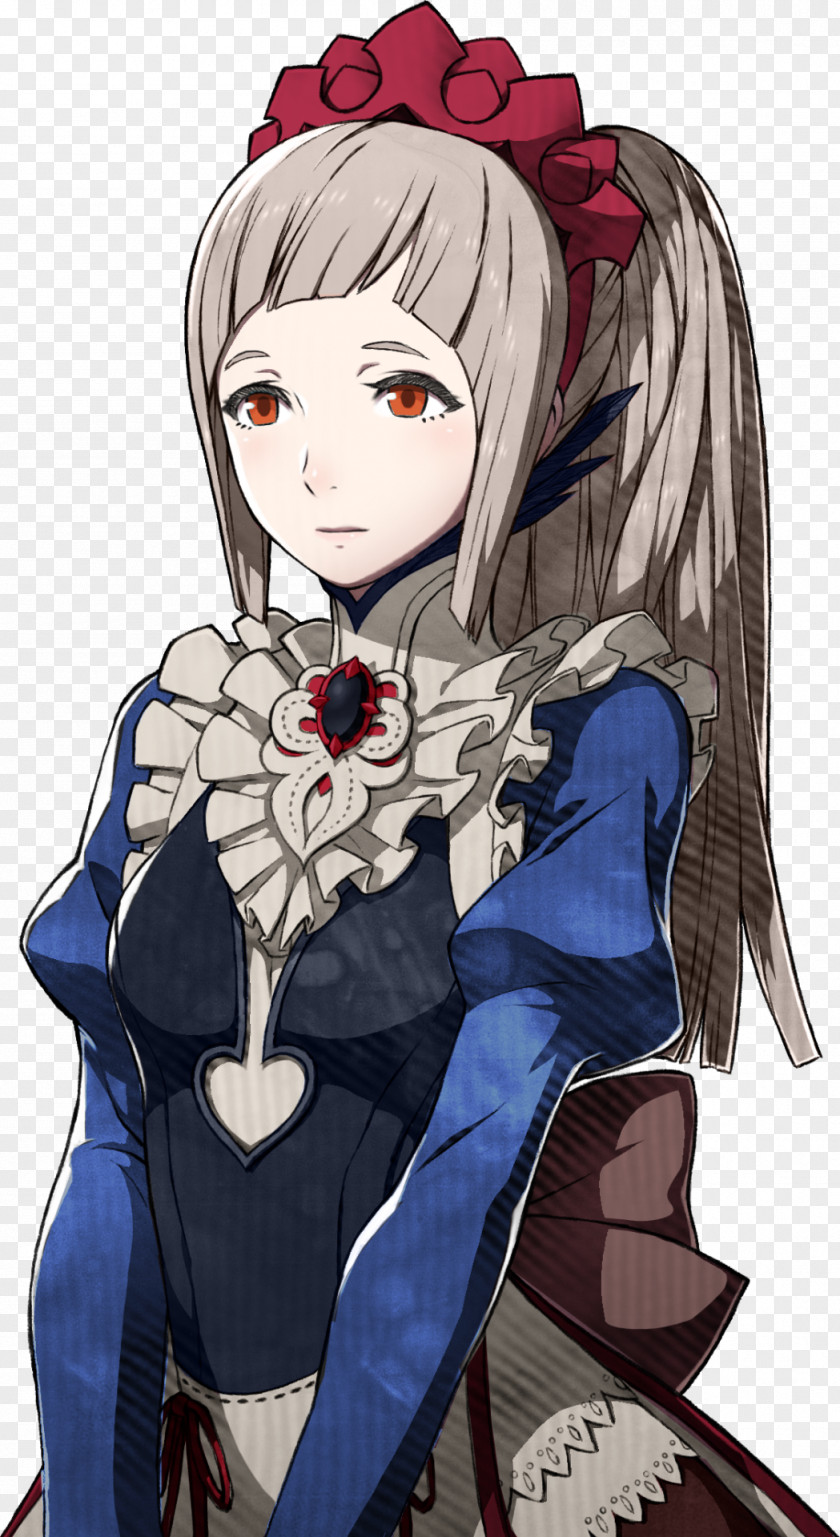 Felicia Fire Emblem Fates Awakening Heroes Tokyo Mirage Sessions ♯FE Video Game PNG